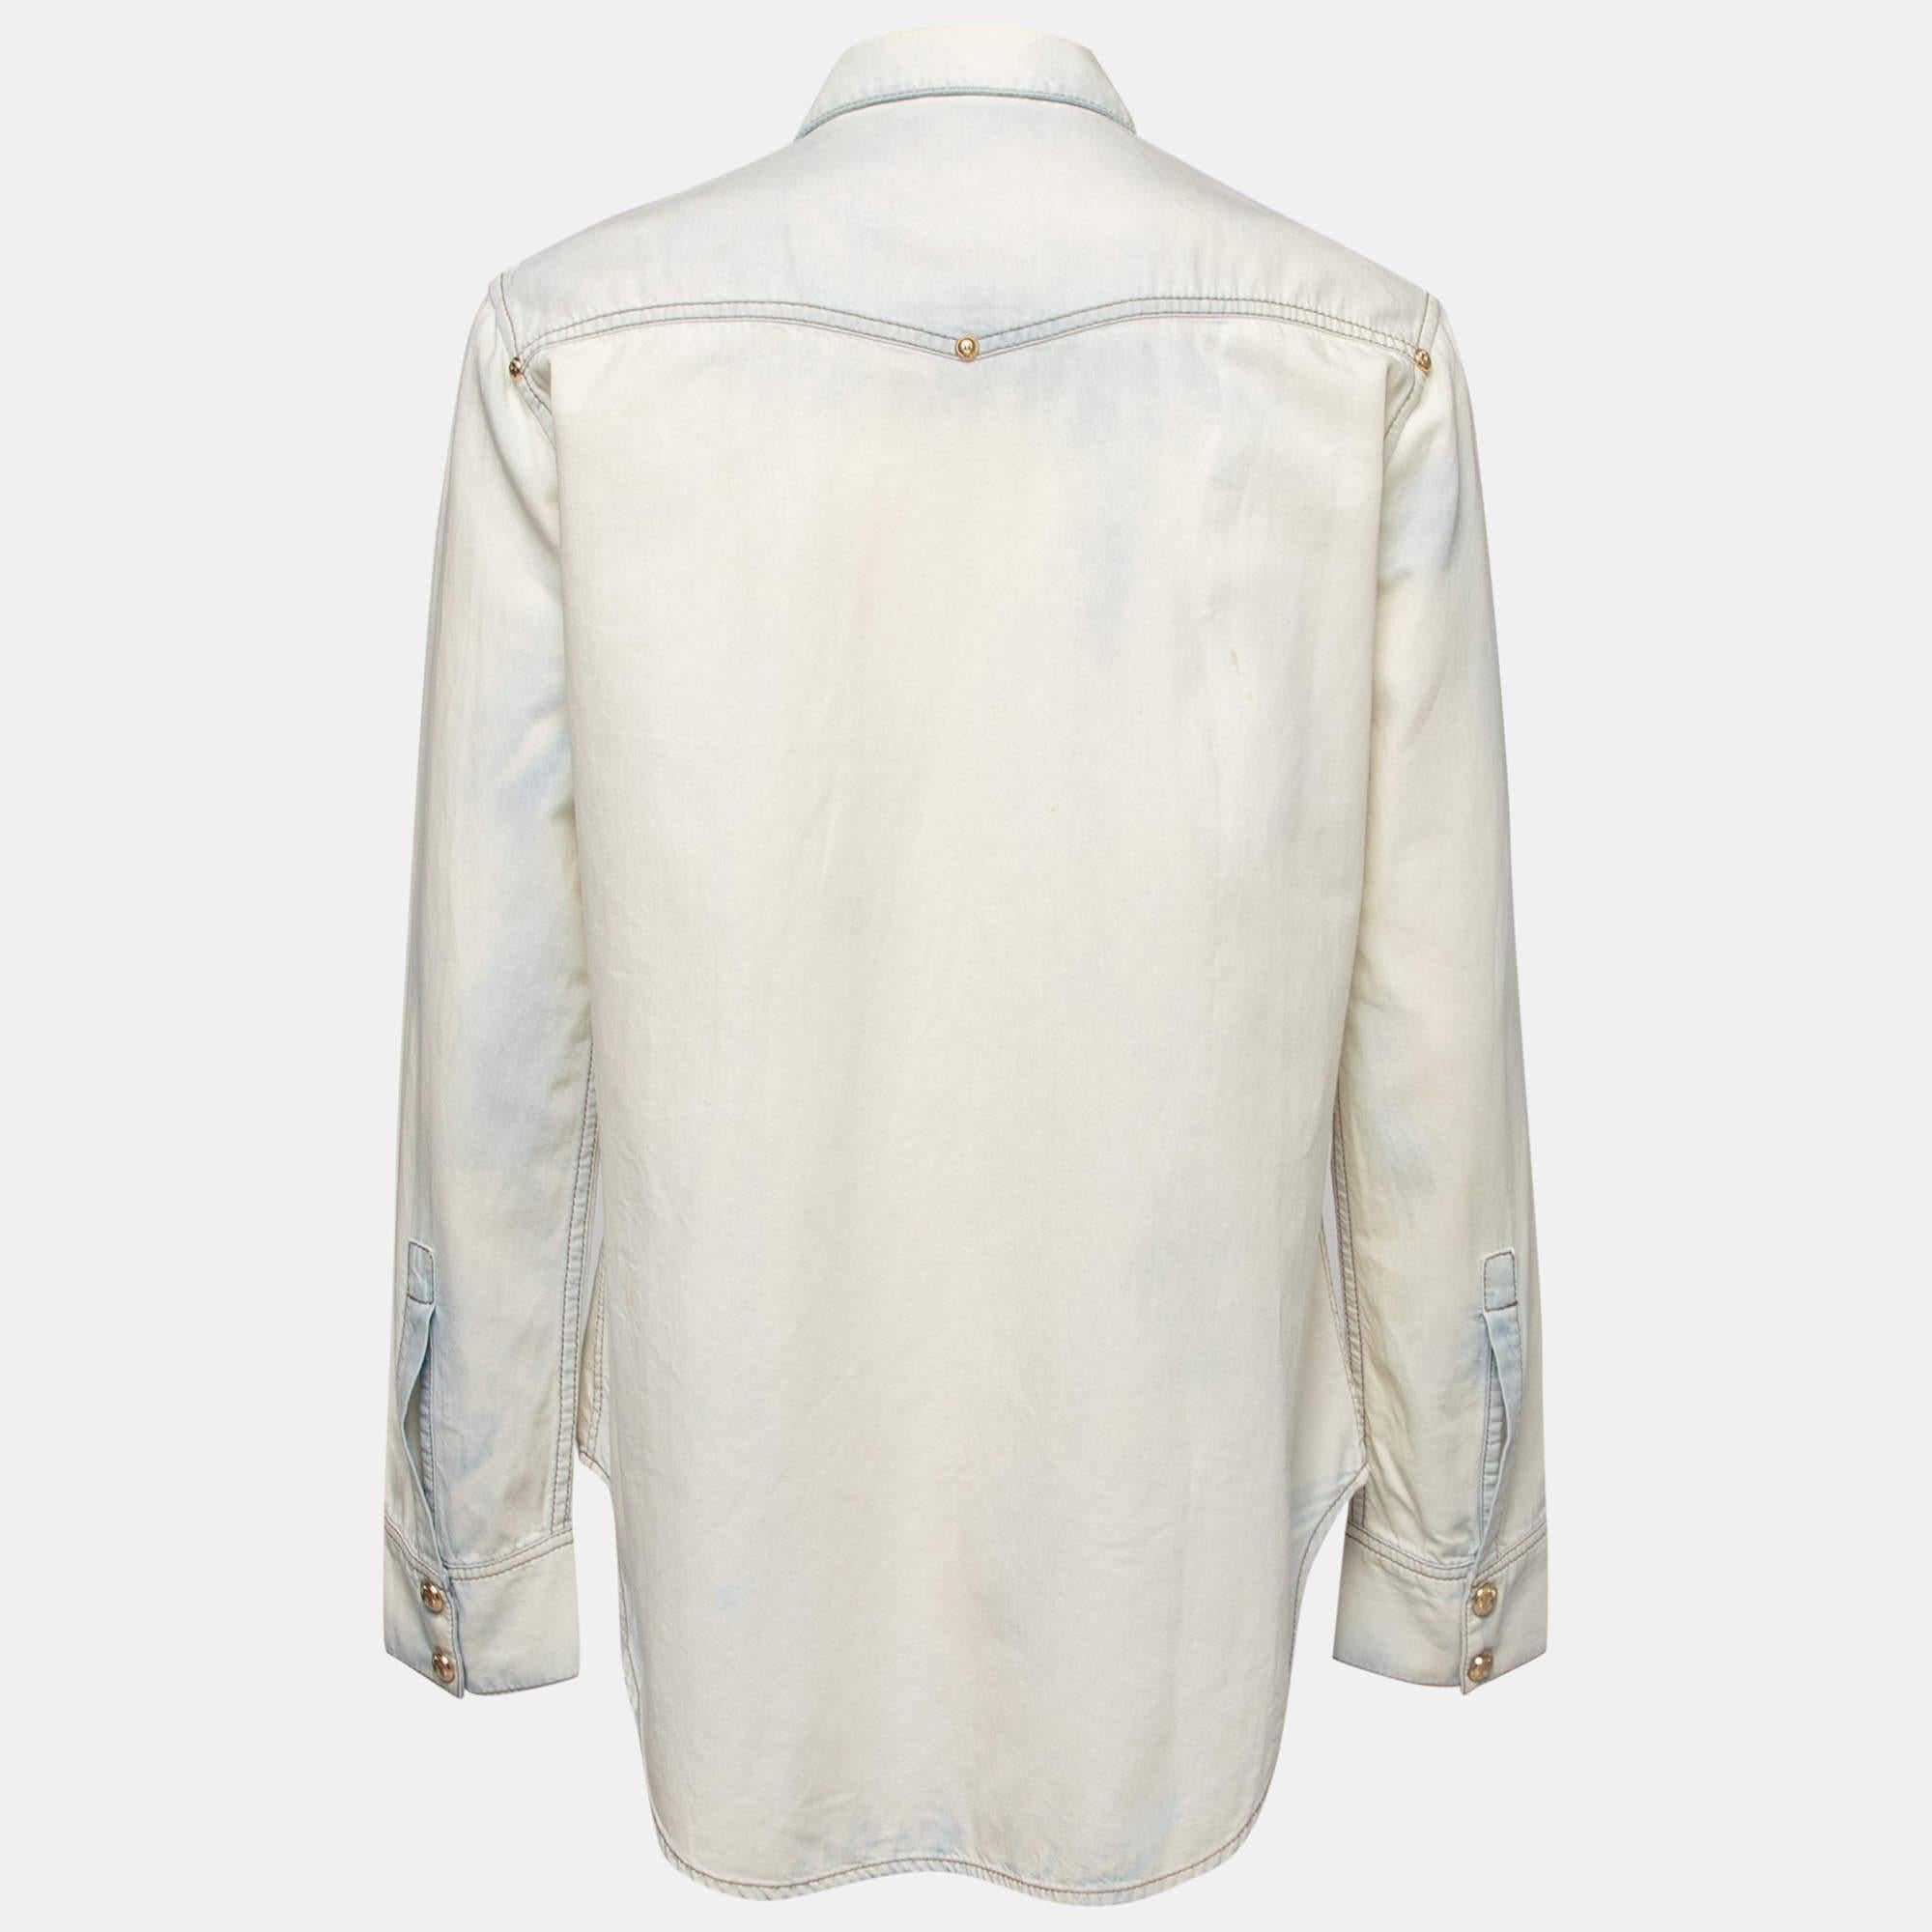 How trendy and comfy this shirt from the House of Balmain! It is designed using bleached-blue denim fabric and flaunts long sleeves, buttoned closures, and two pockets. Look smart and stylish as you wear this Balmain shirt.

